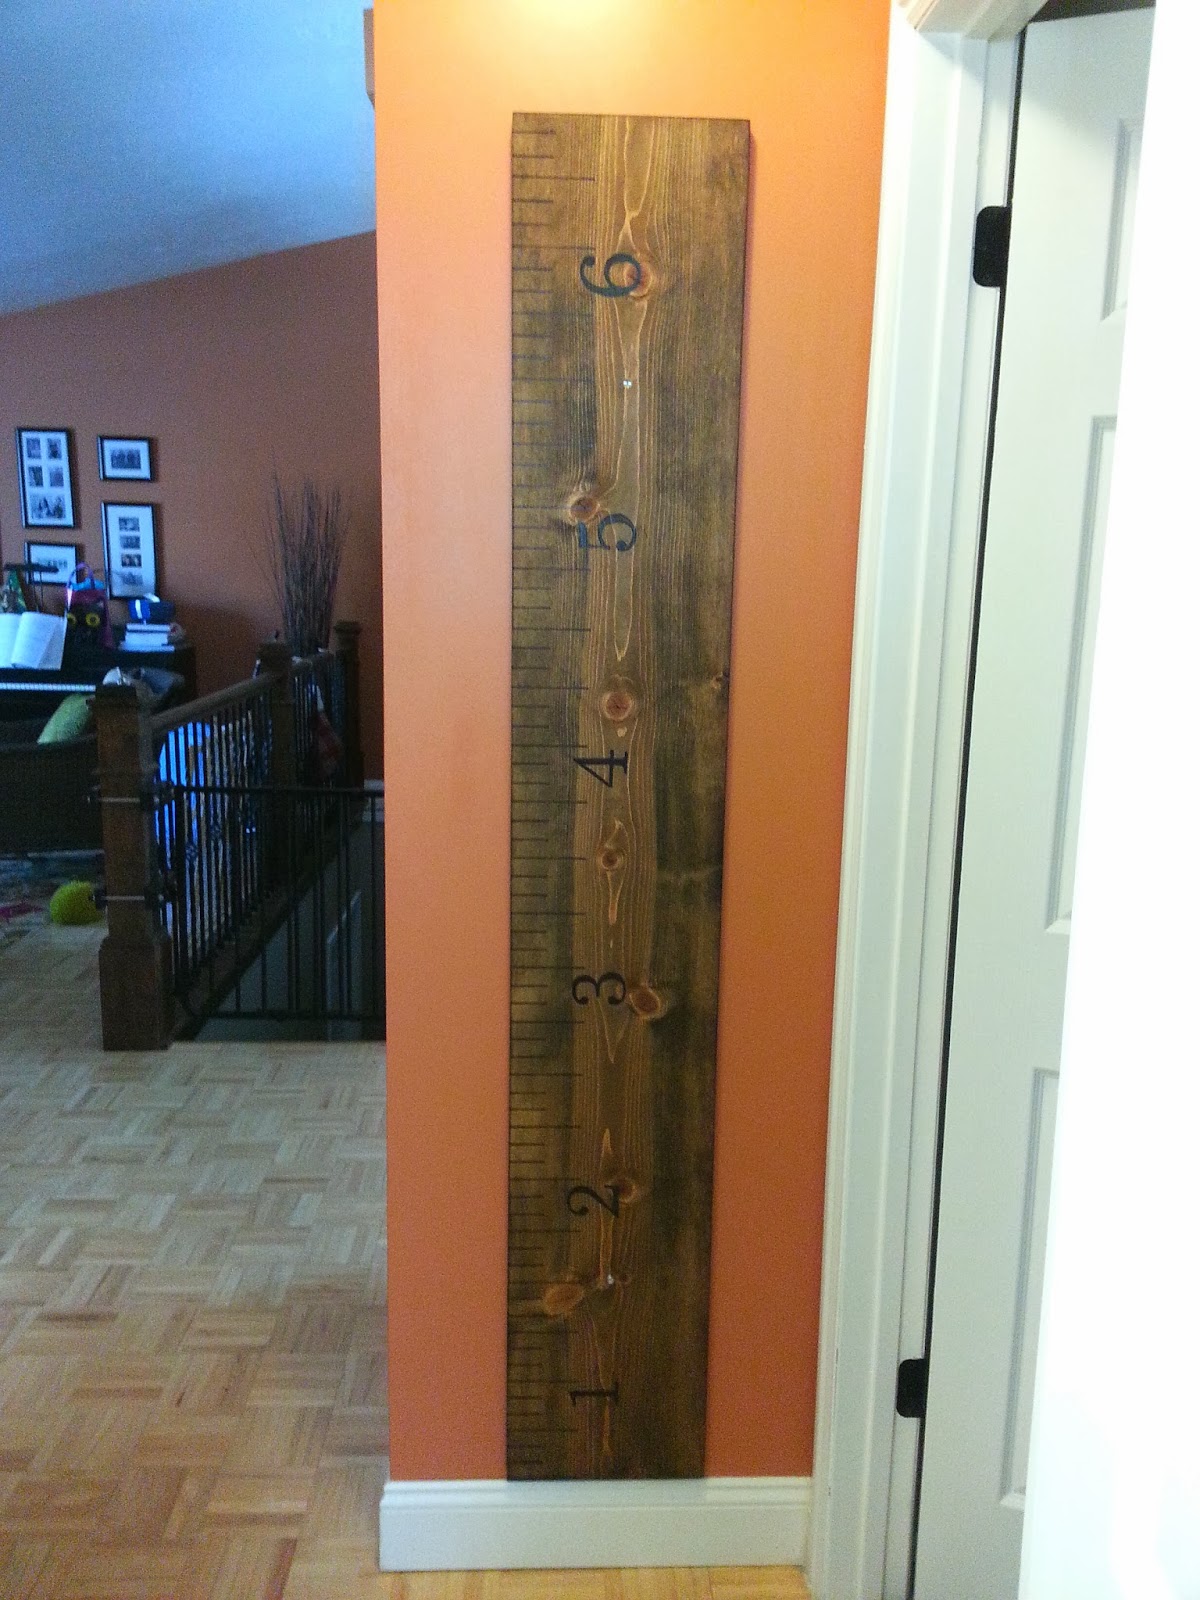 Giant Wooden Ruler Growth Chart